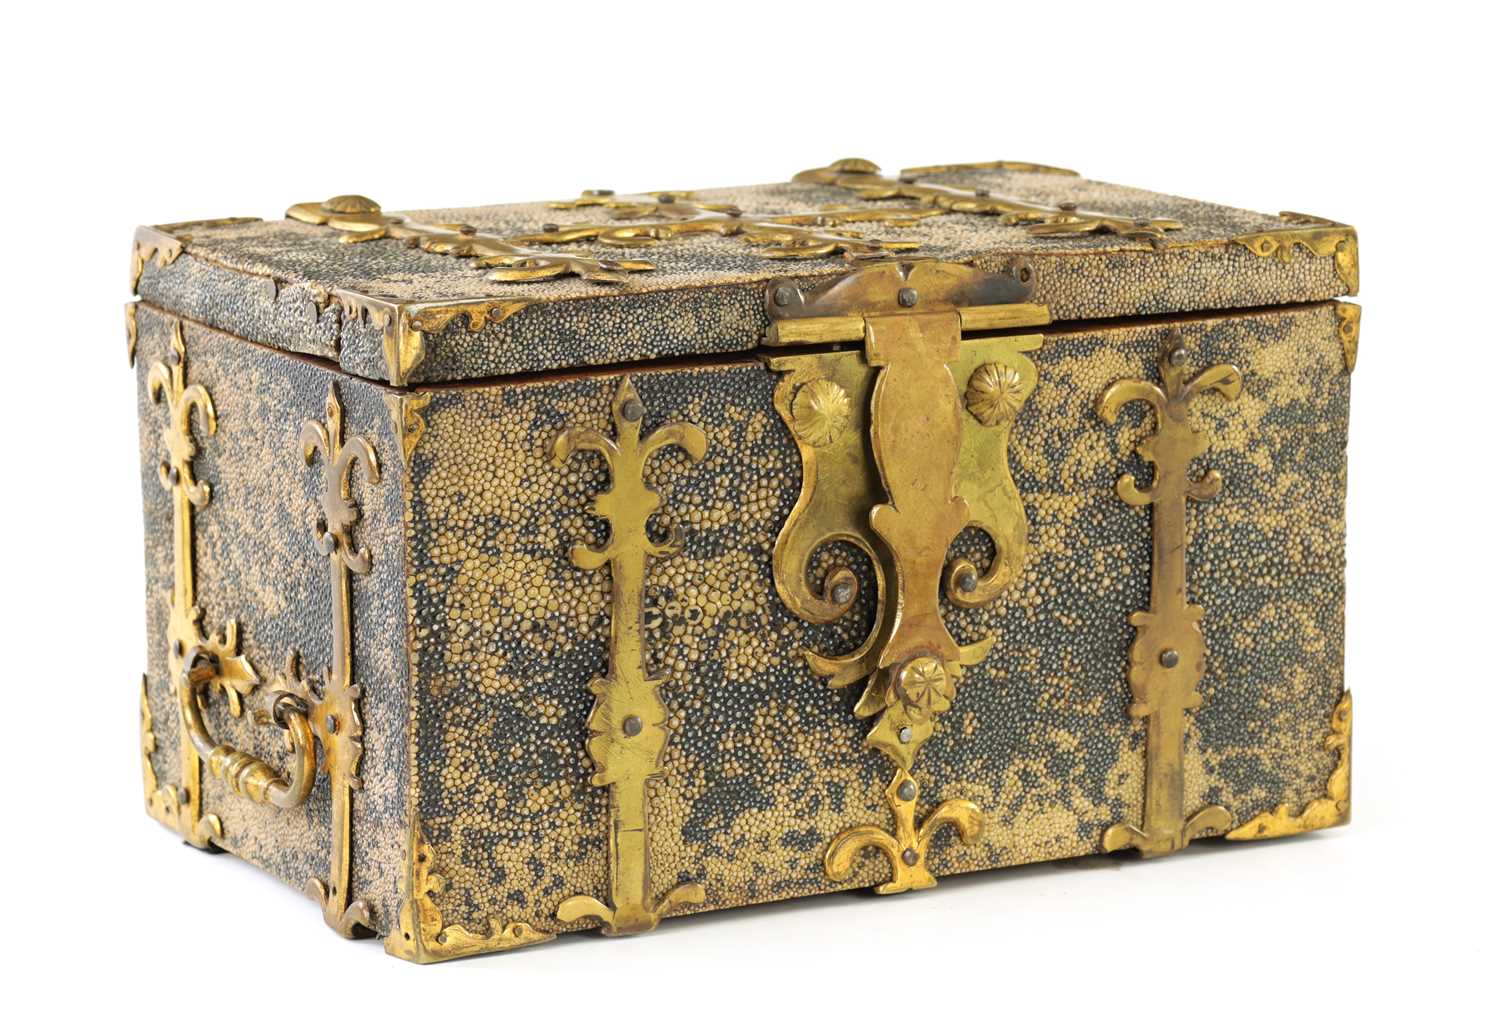 Lot 654 - A SMALL LATE 17TH/EARLY 18TH CENTURY CONTINENTAL SHAGREEN COVERED COFFRE FORTE